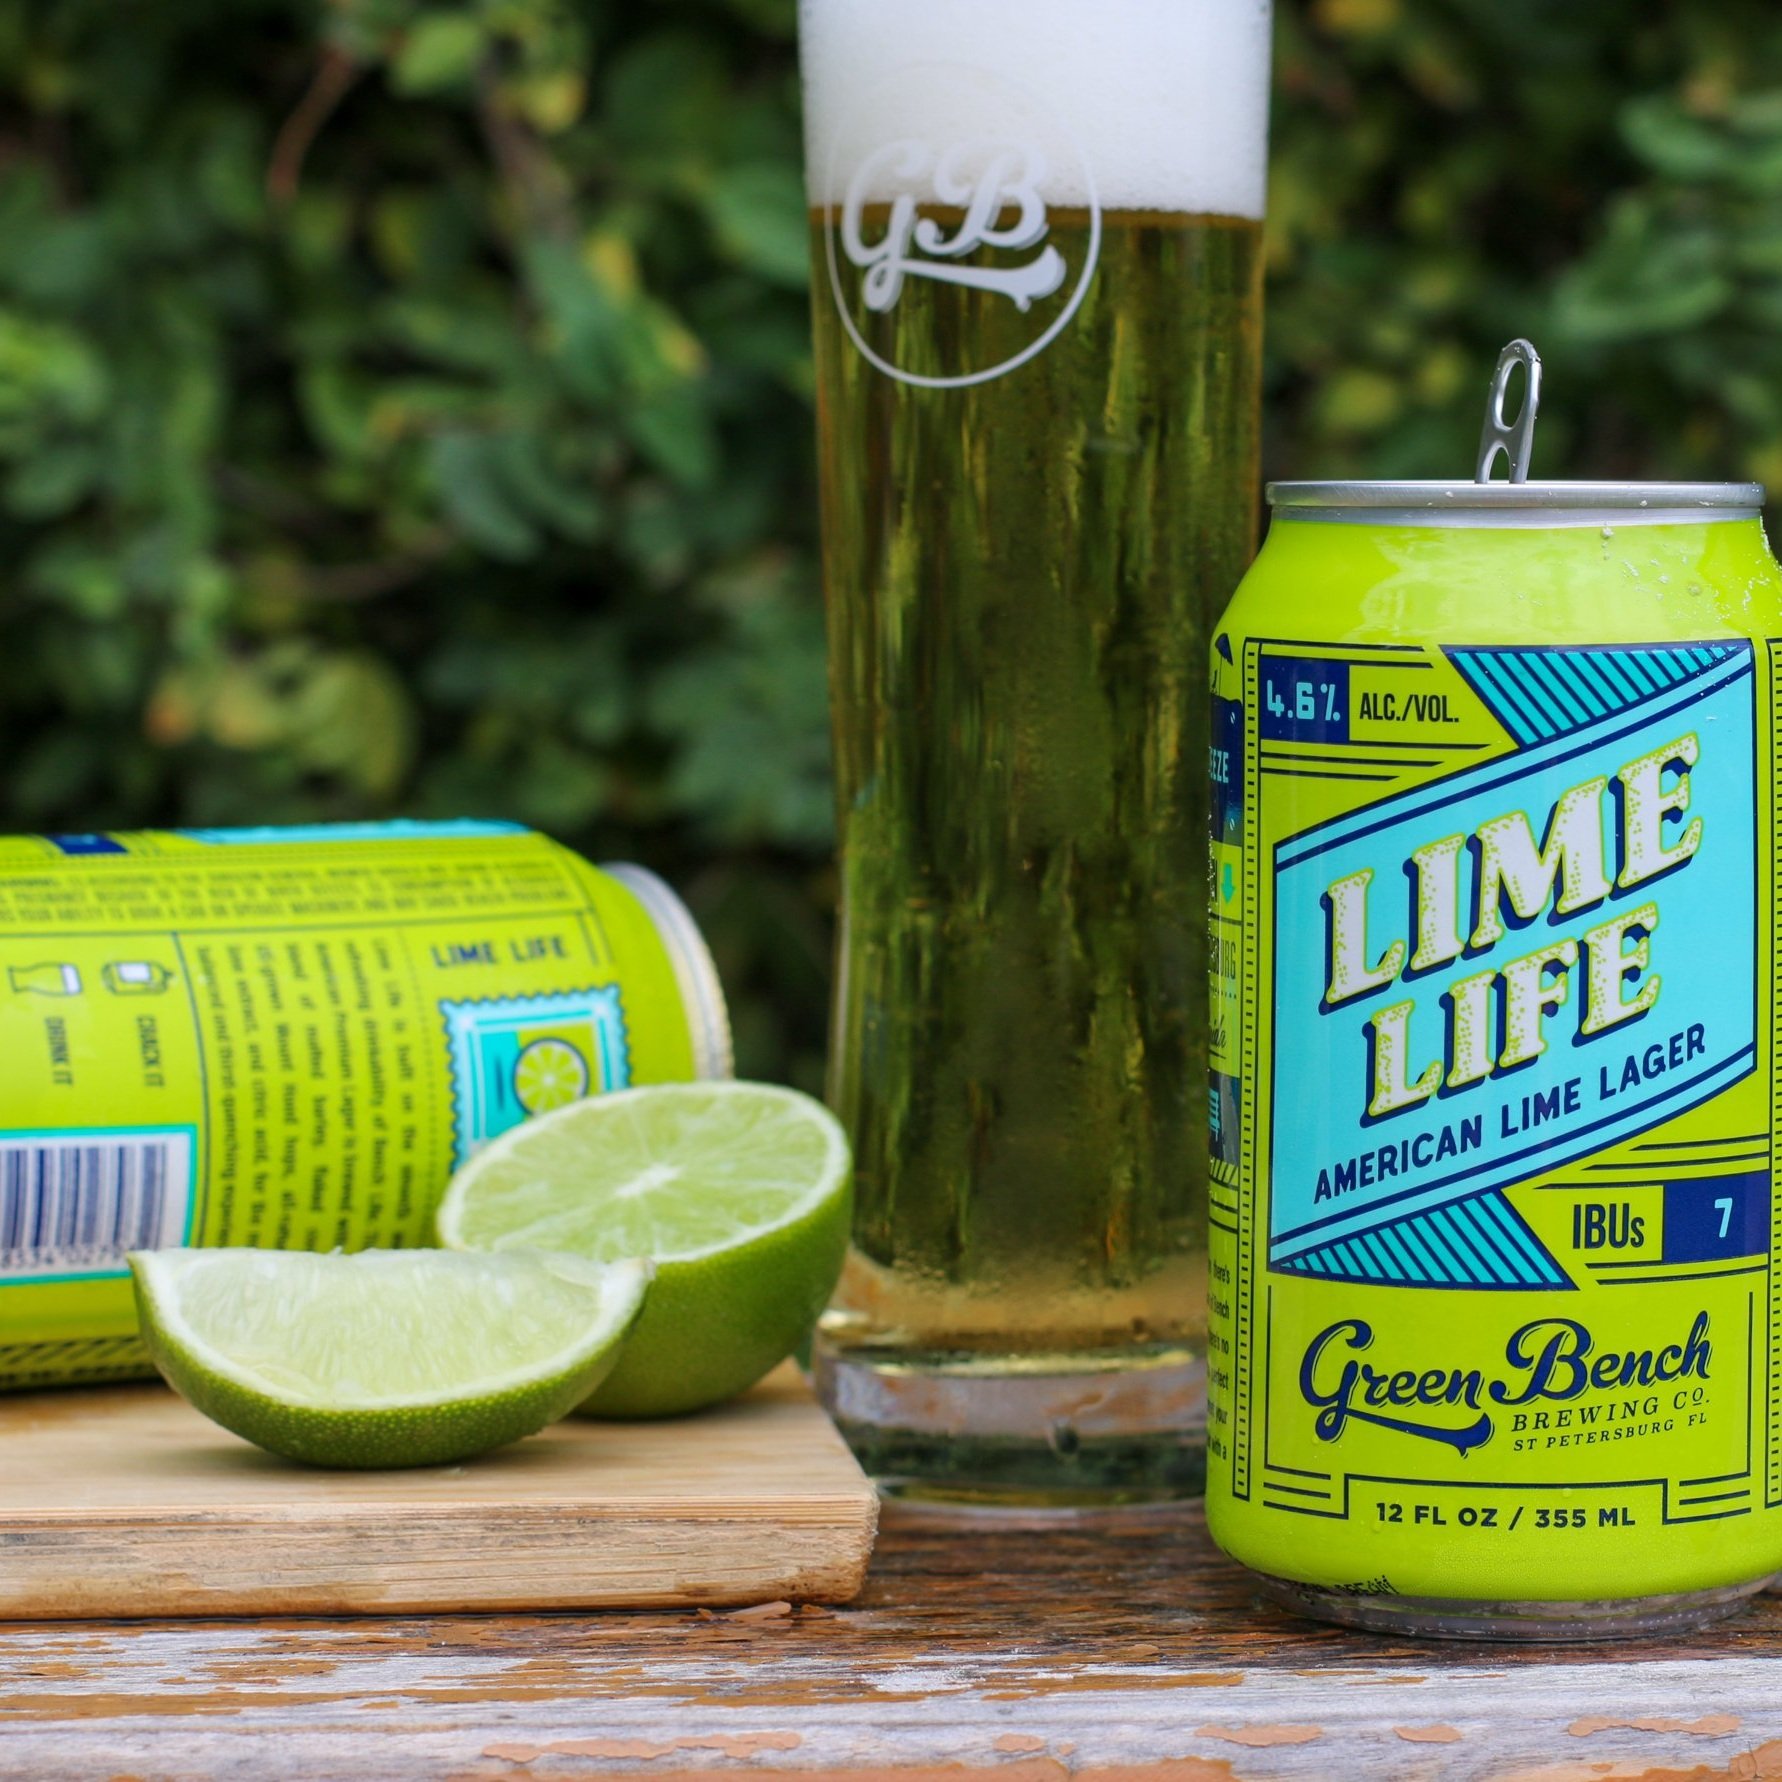 Green Bench Brewing Lime Life Lager